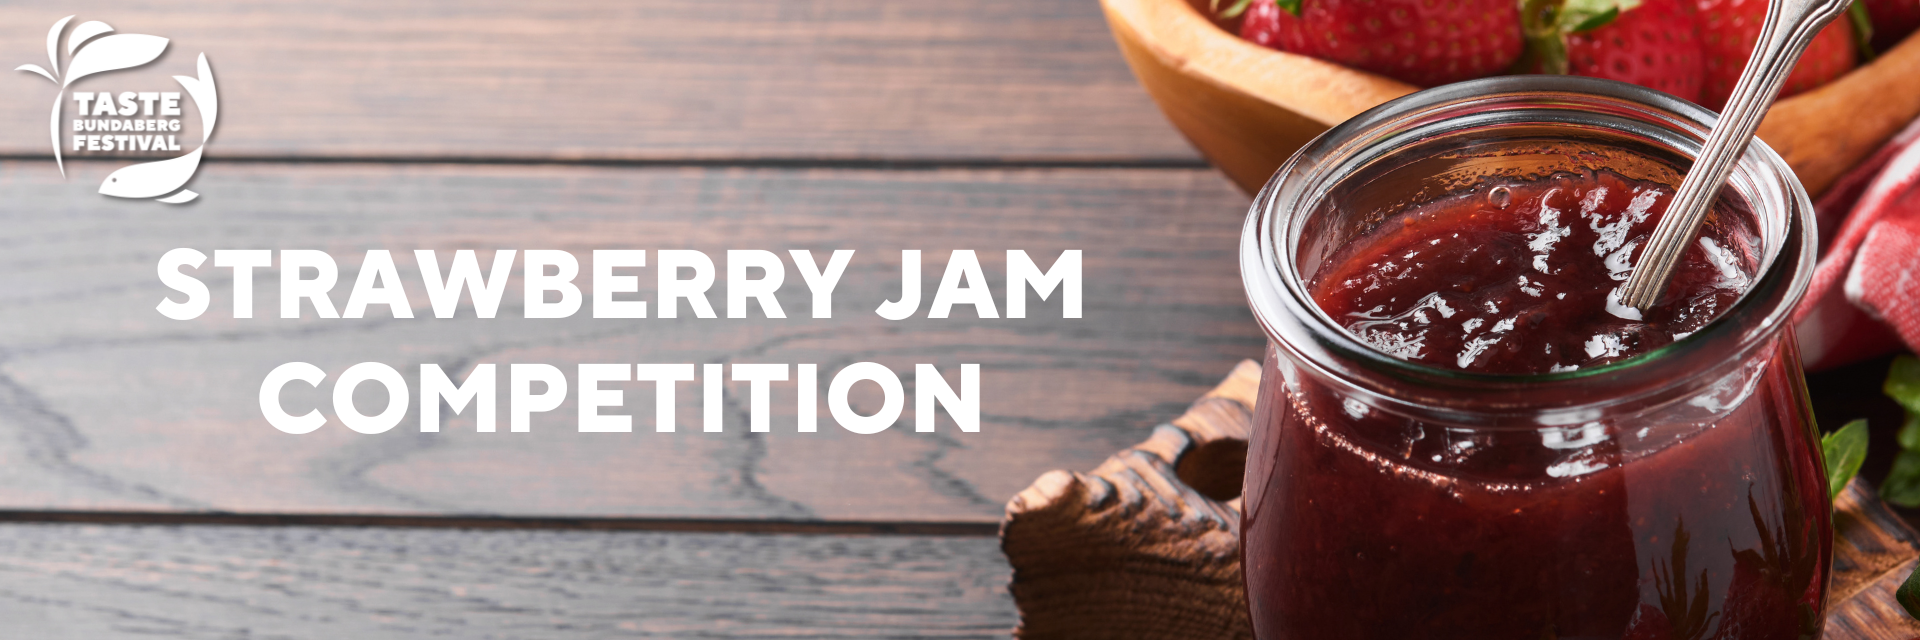 Strawberry jam competition